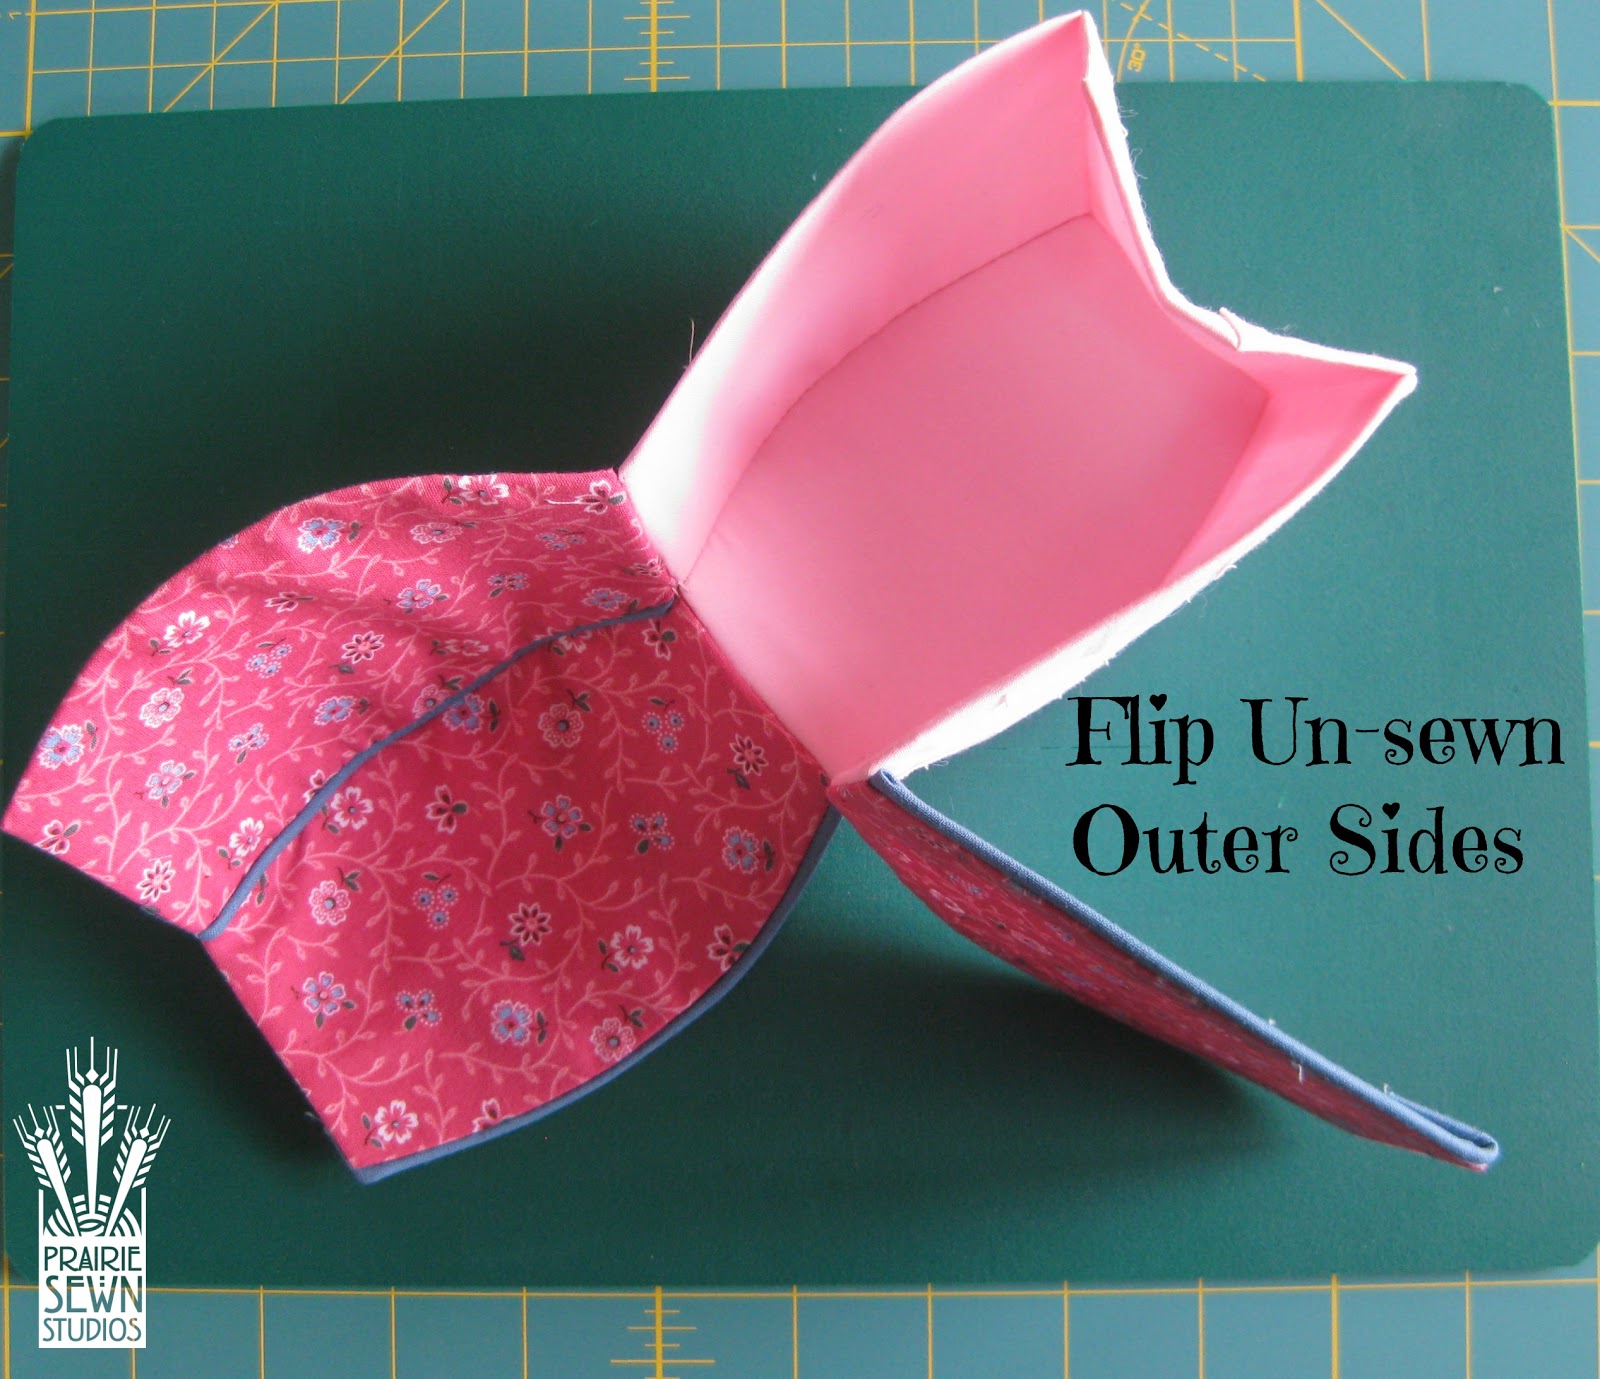 Flip un-sewn outer sides - Pumpkin with Piping